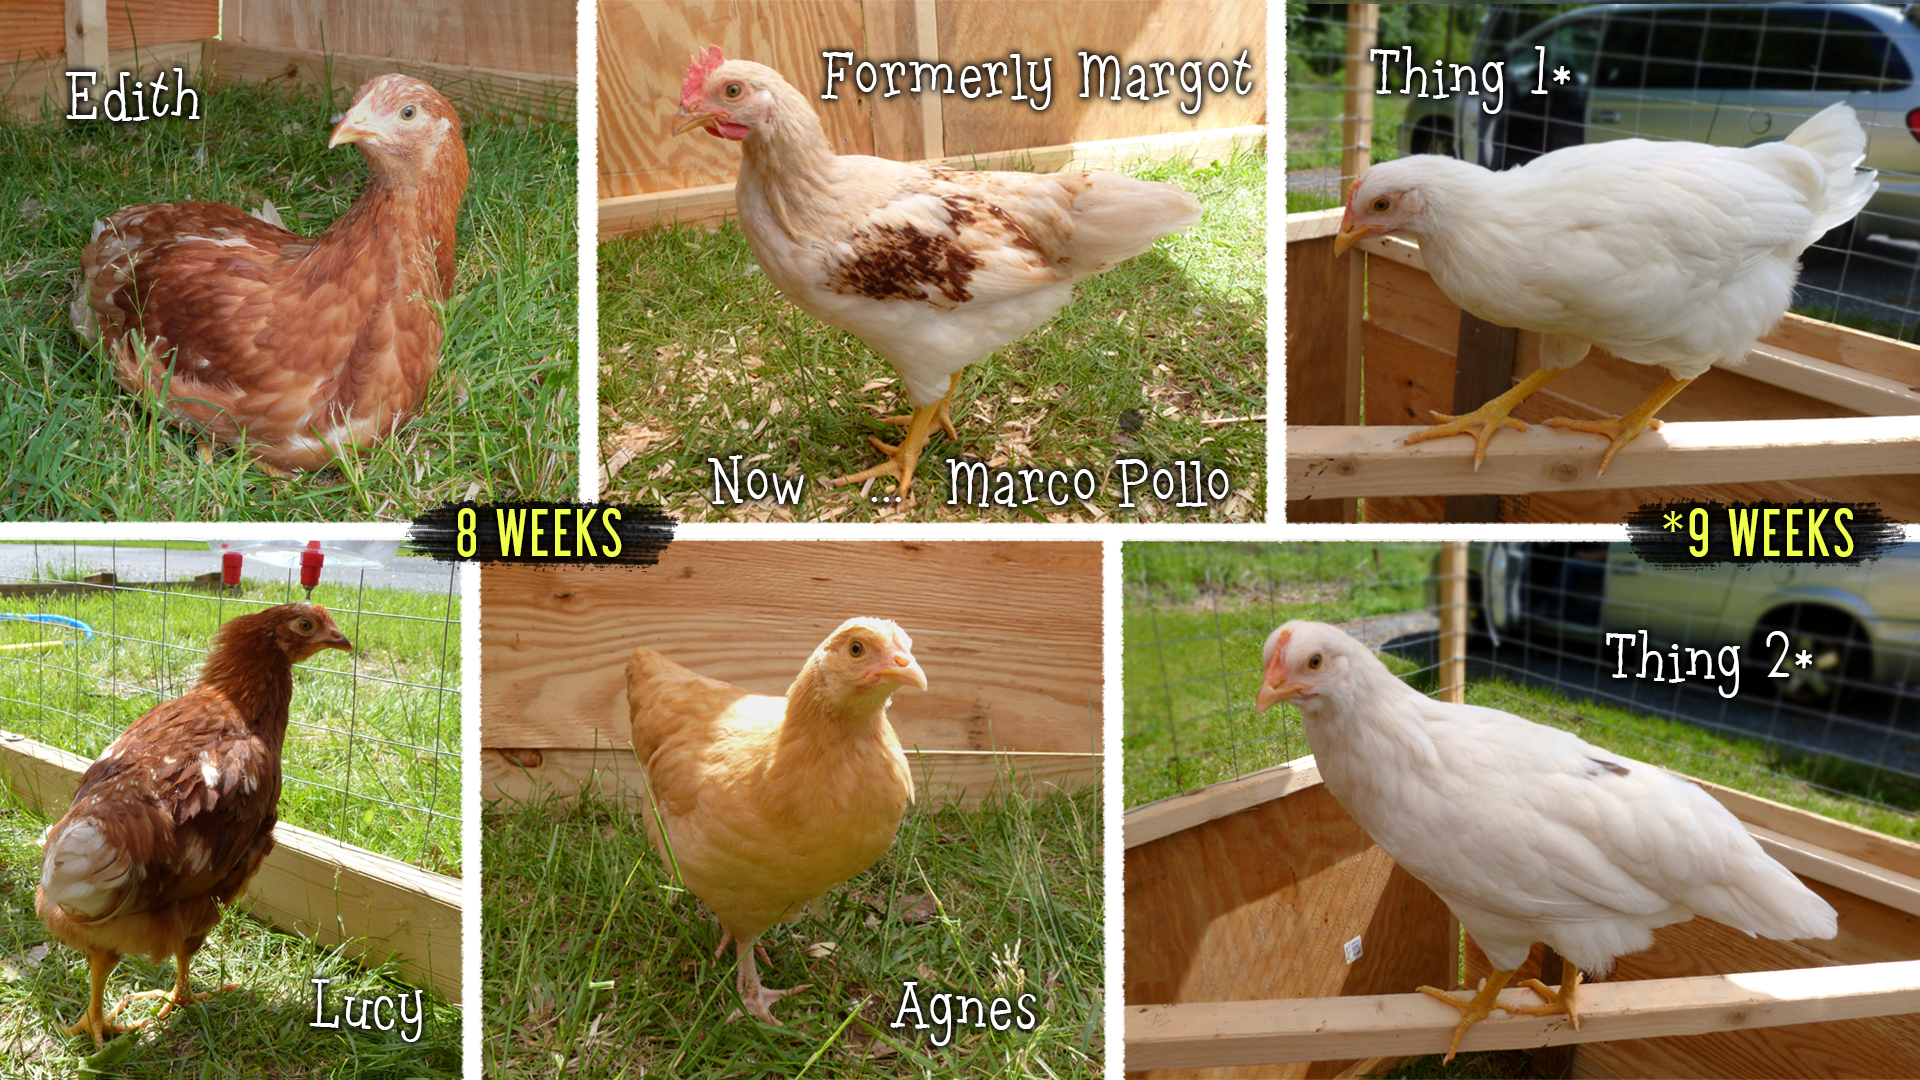 Note-to-self (and any newbies that might be reading) ... name your chicks after 8 weeks!!
Our chookies are growing fast (while eating less feed!), especially now with sun & pasture!